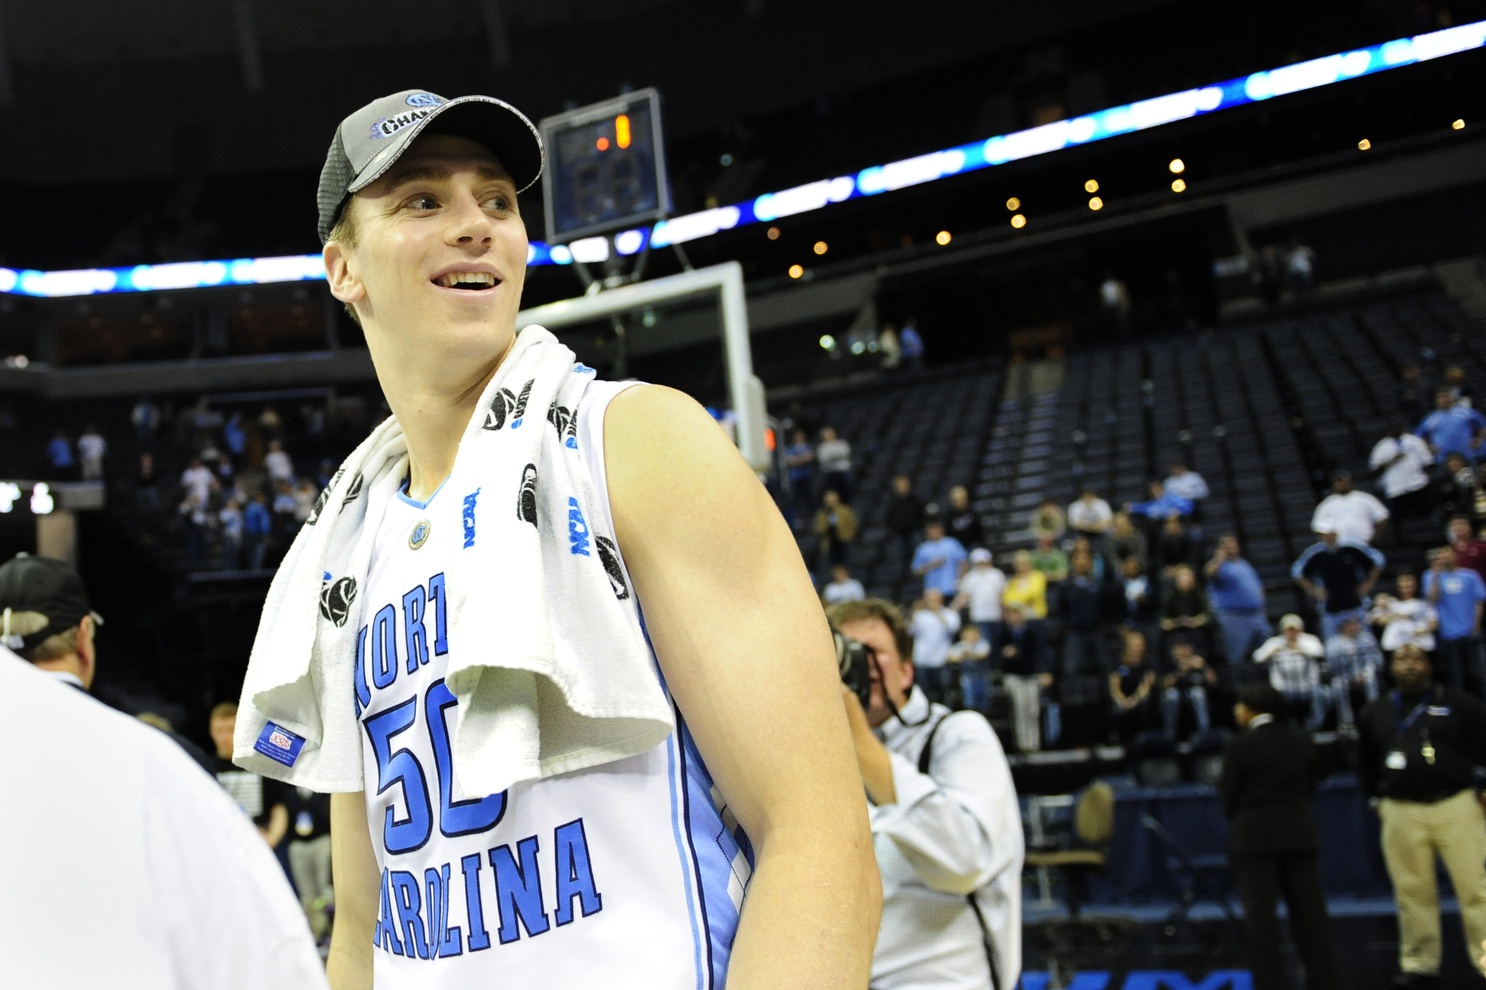 UNC basketball great Tyler Hansbrough joins College Basketball Hall of Fame